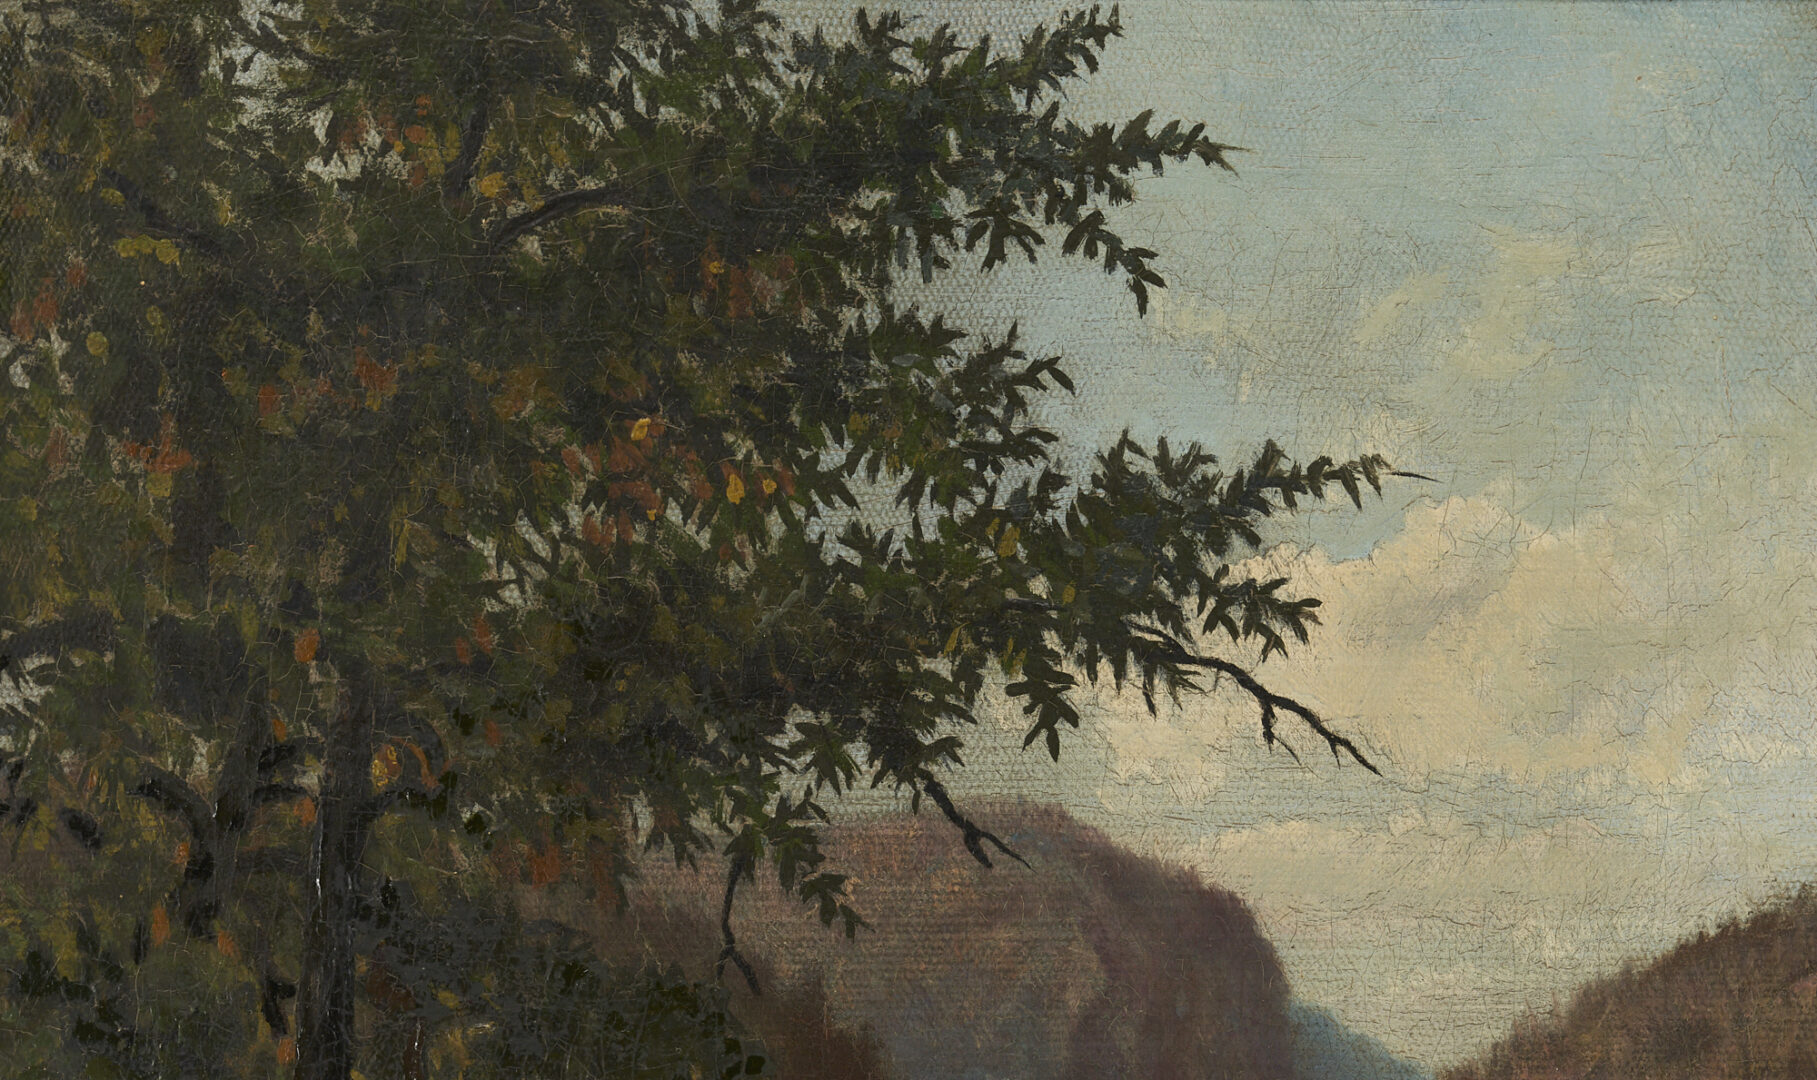 Lot 270: Exhibited Philip Hahs Landscape Painting, On the Delaware, 1875